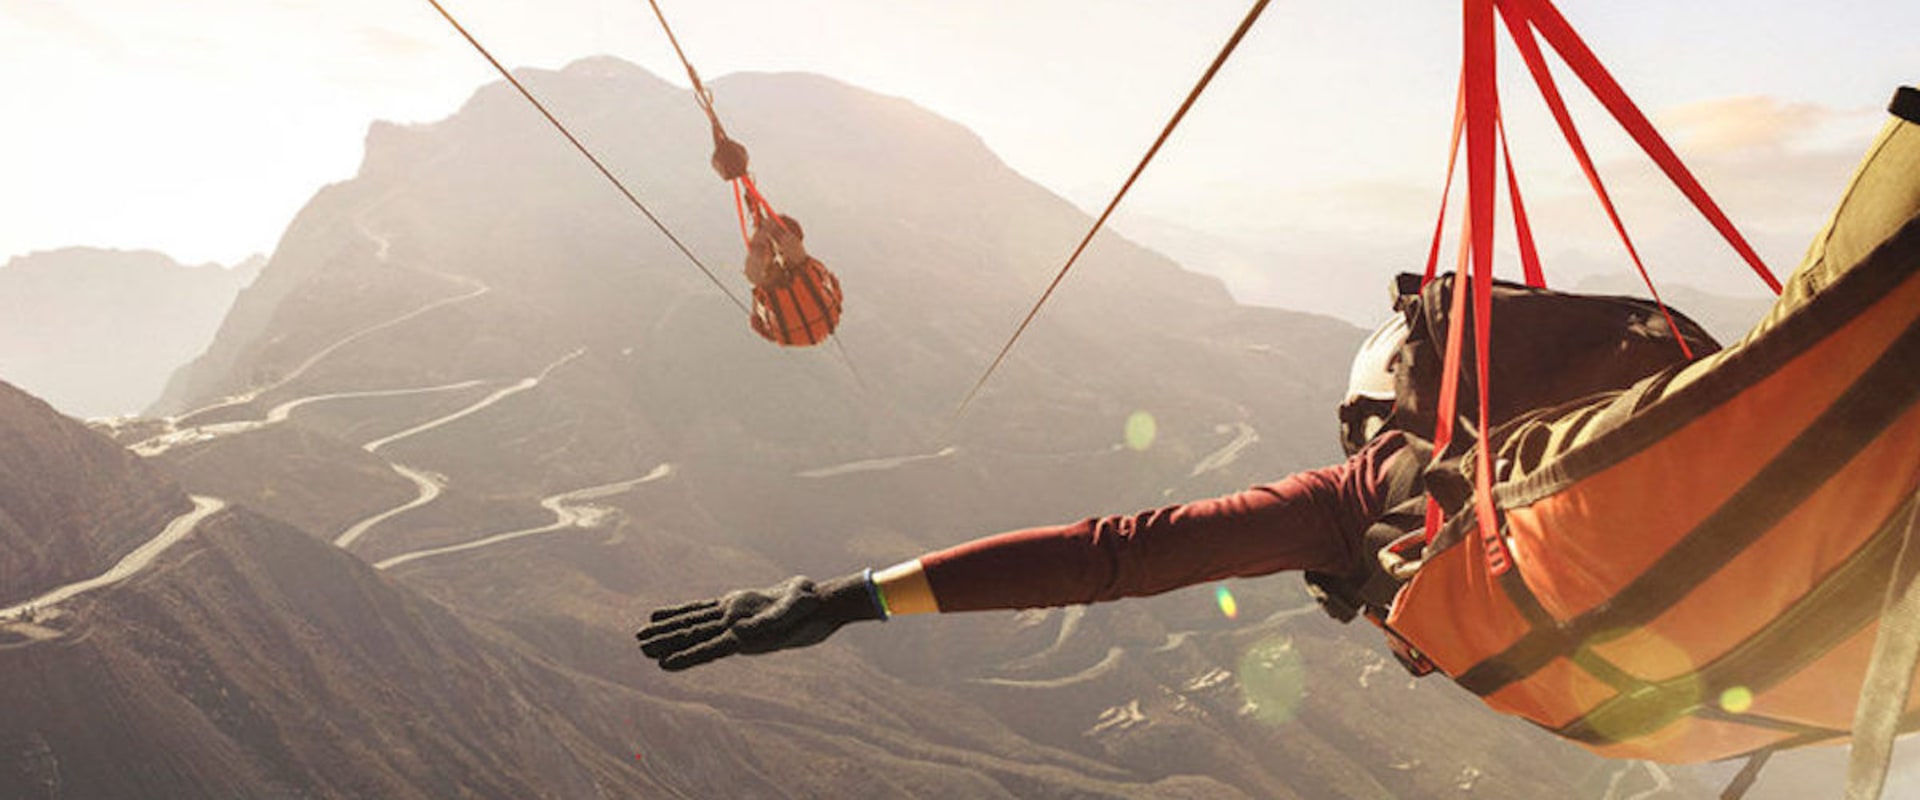 What are the 3 longest ziplines in the world?